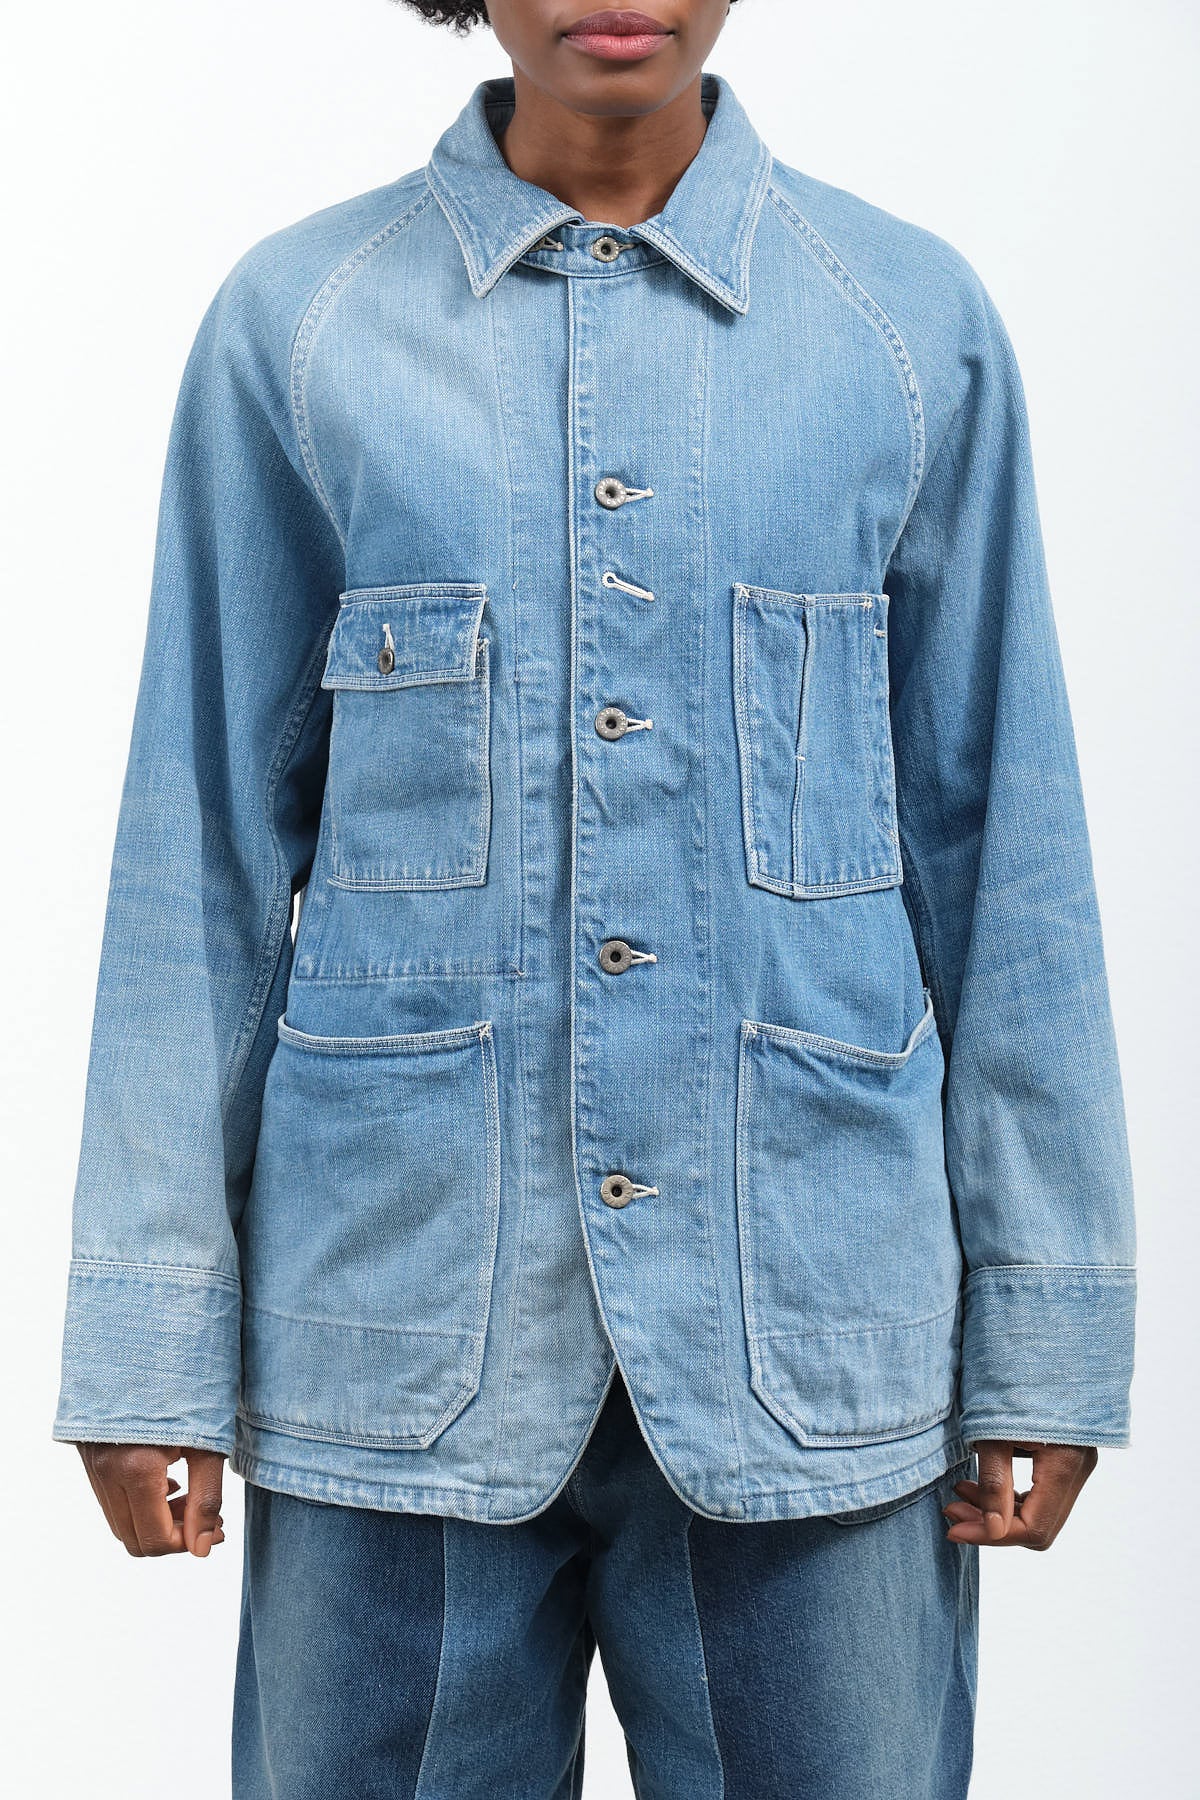 12oz Denim Cactus Coverall Jacket by Kapital in Light